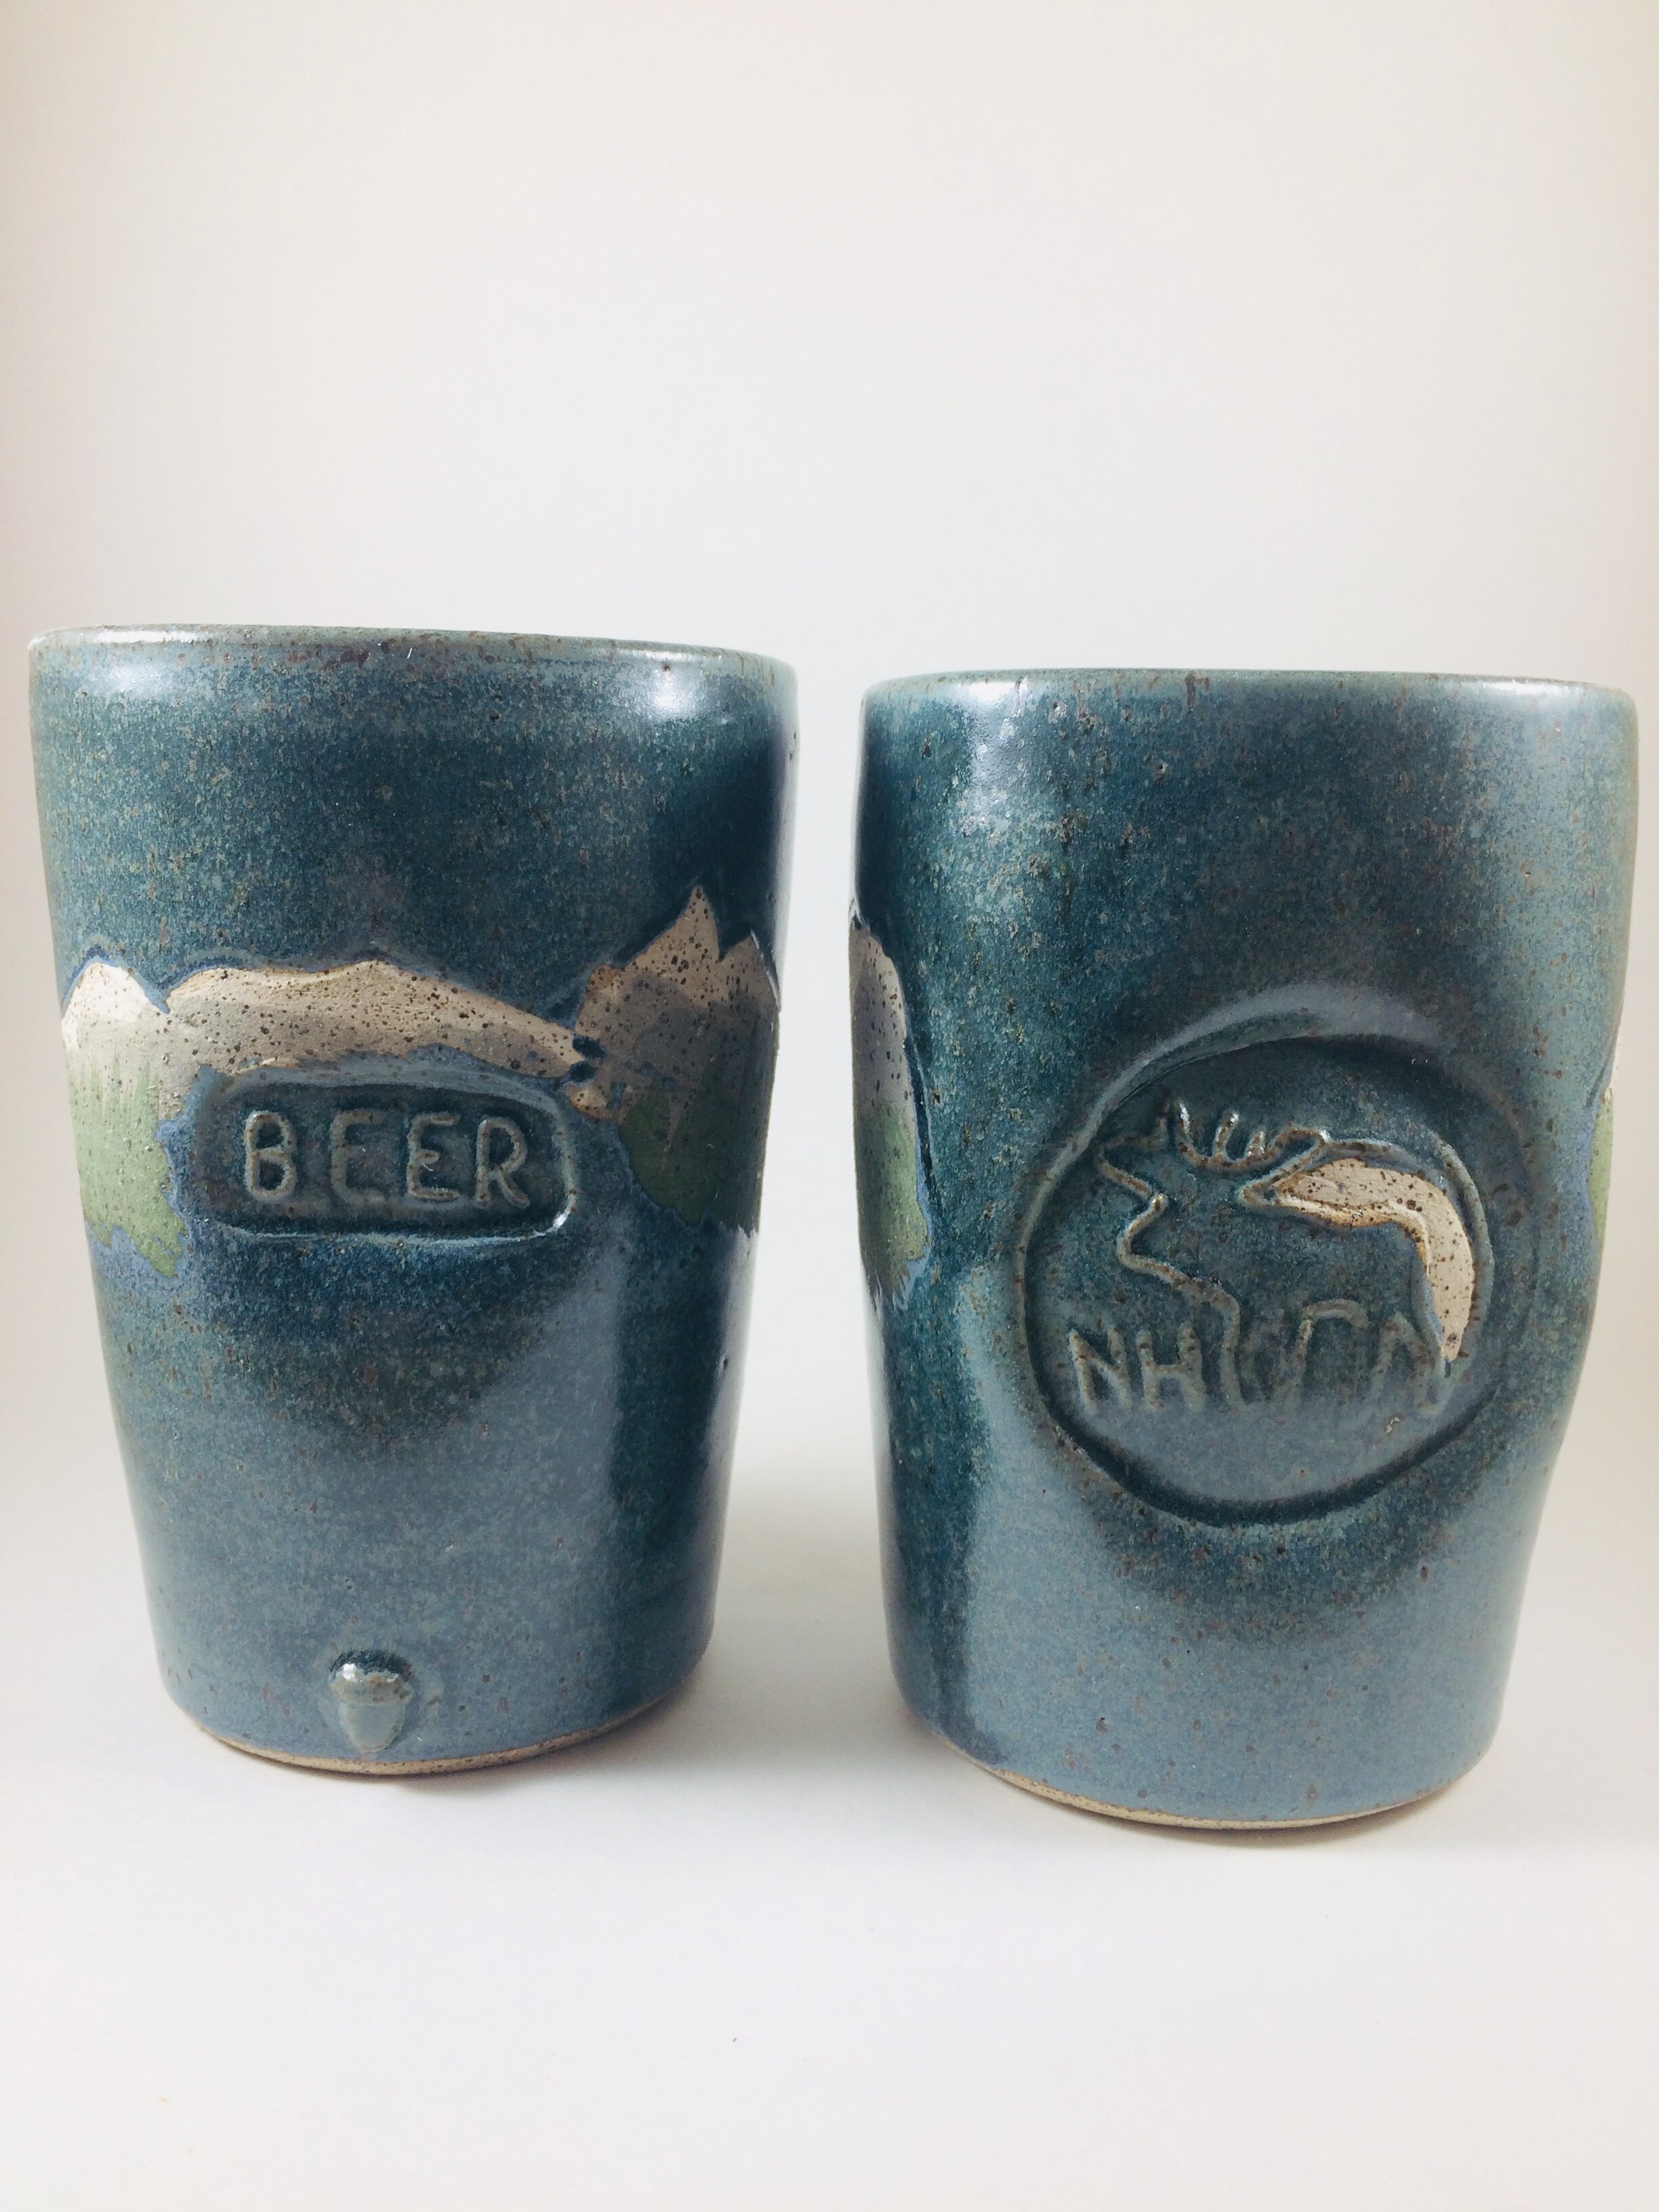 Mountain Pattern mugs handcrafted by Michael Gibbons of Nutfield Pottery, Derry, NH, USA